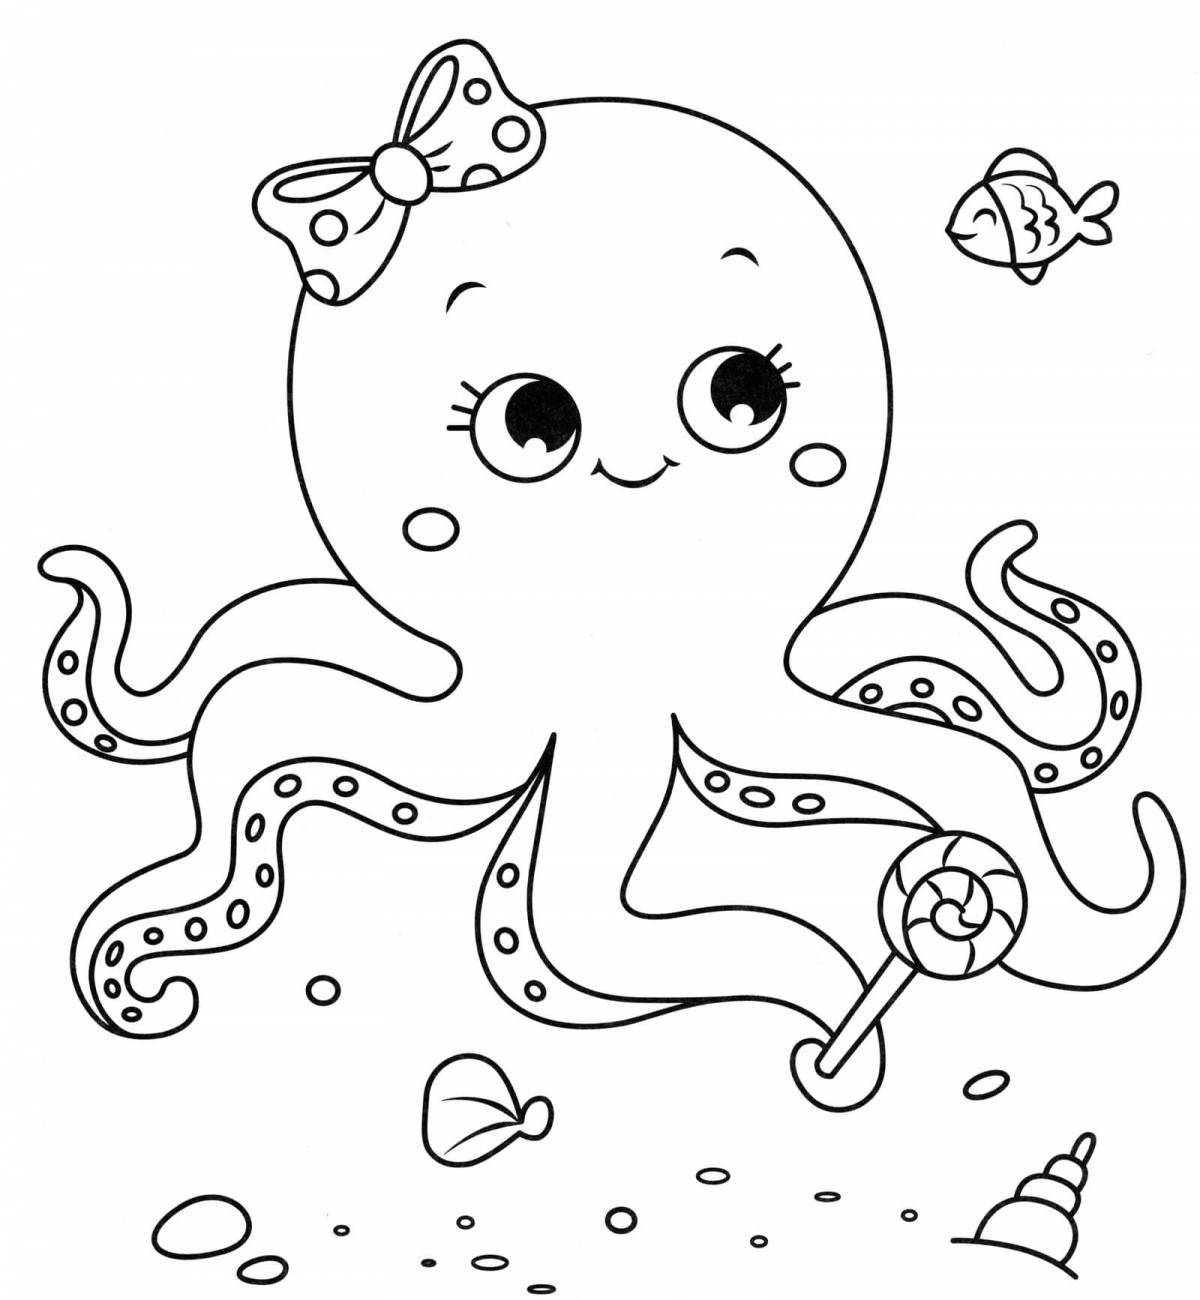 A fascinating marine life coloring book for kids